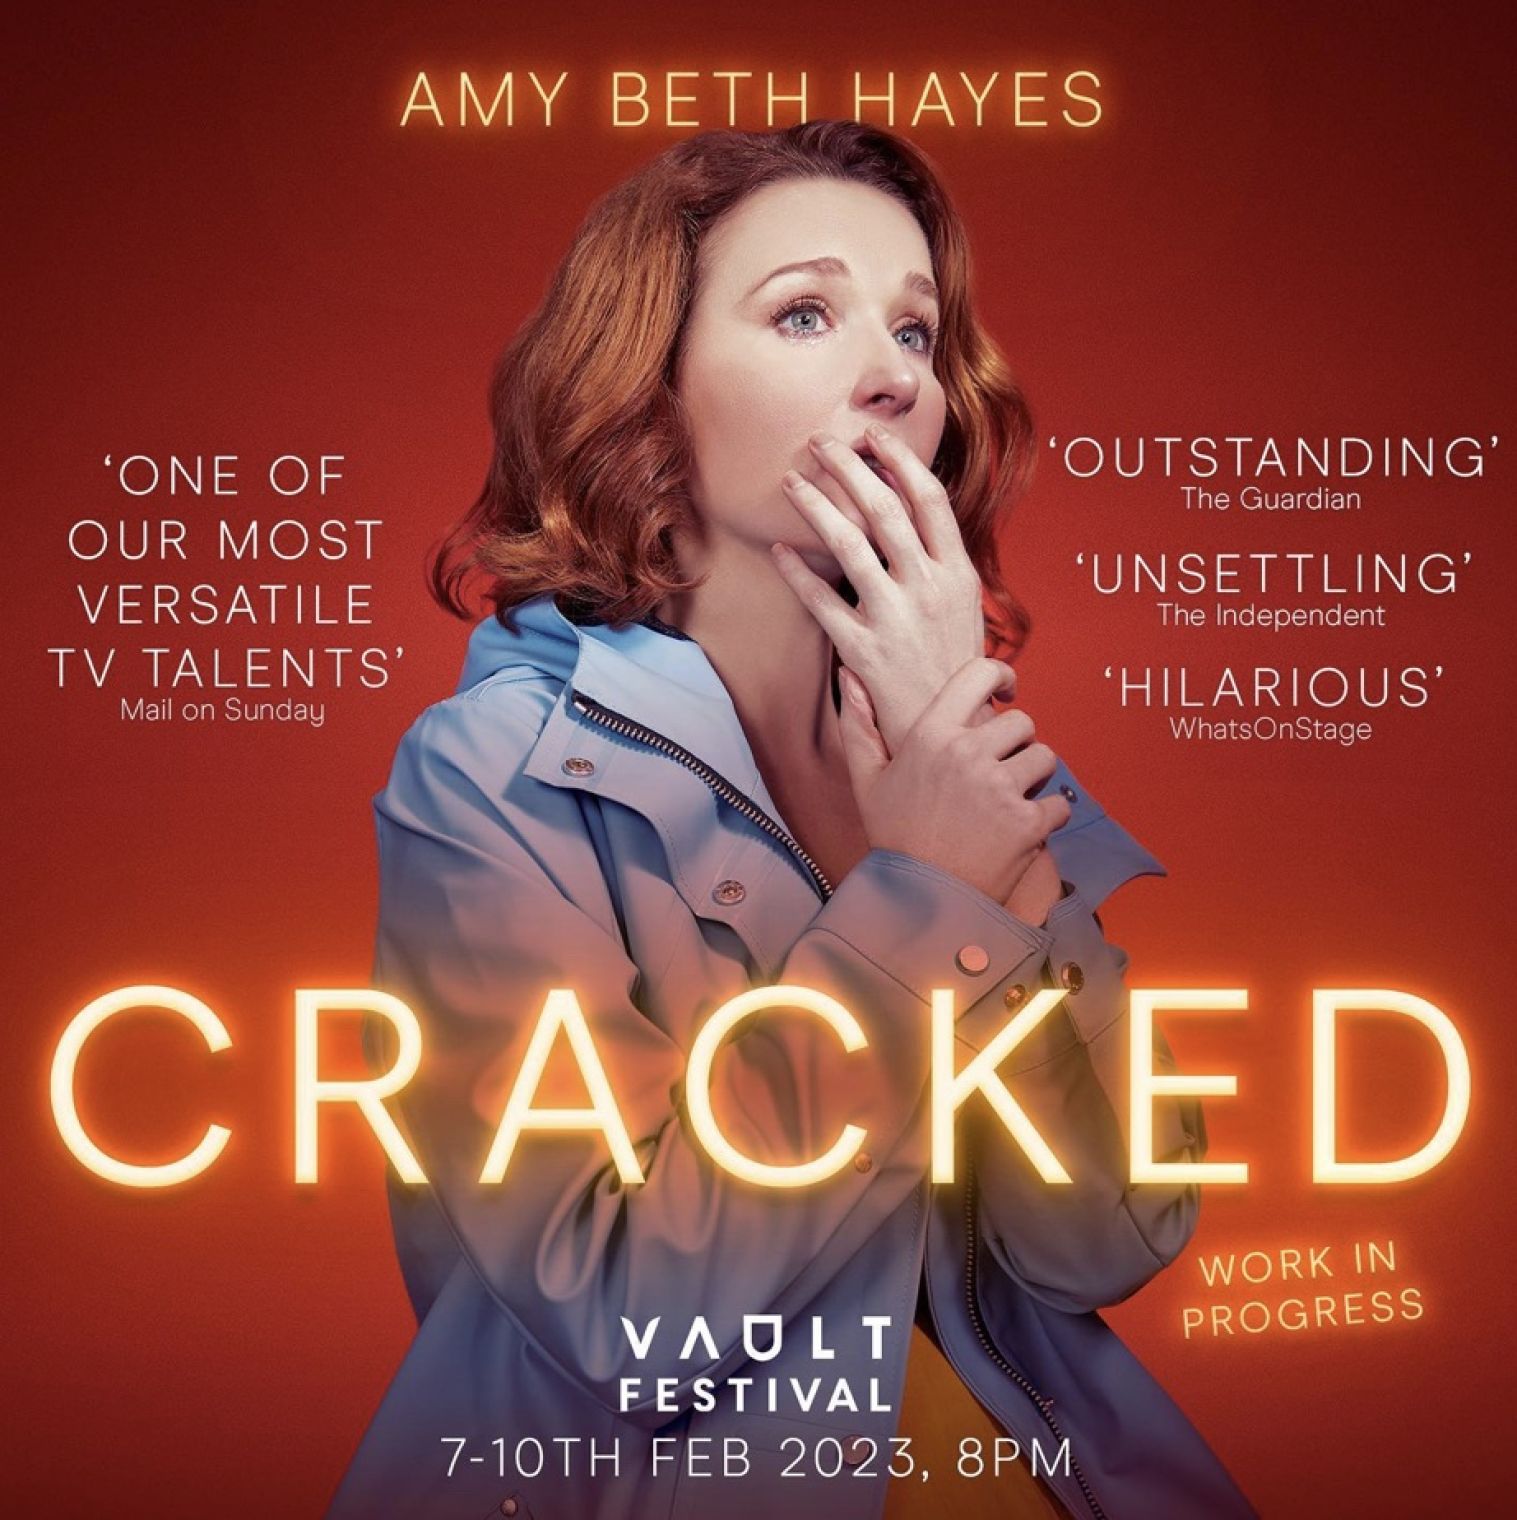 Amy Beth Hayes's debut play 'Cracked' is one of the Evening Standard's Picks of the Vault Festival 2023